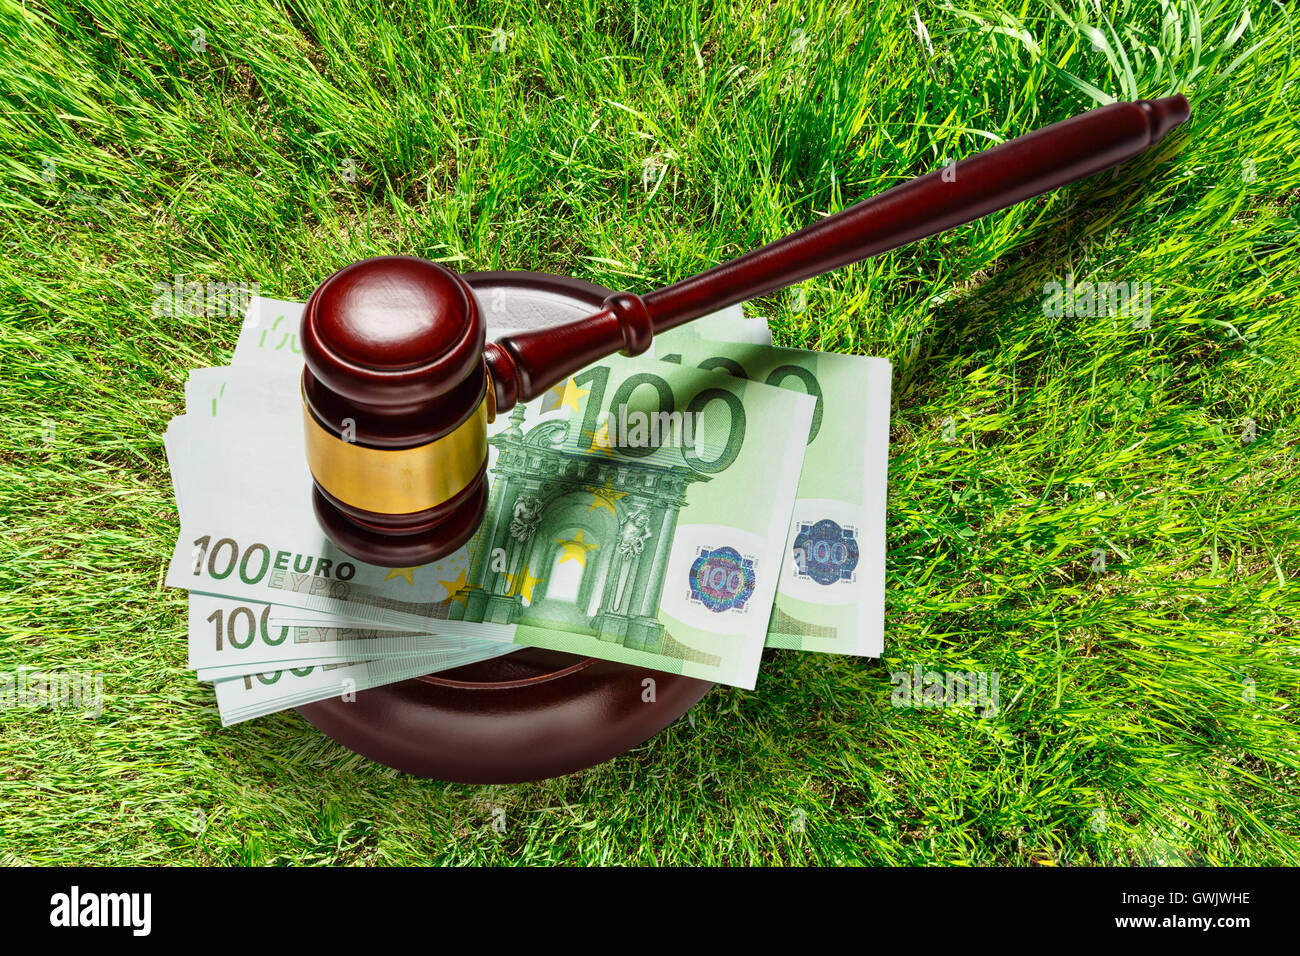 Wooden judge's gavel and one hundred euro banknotes Stock Photo